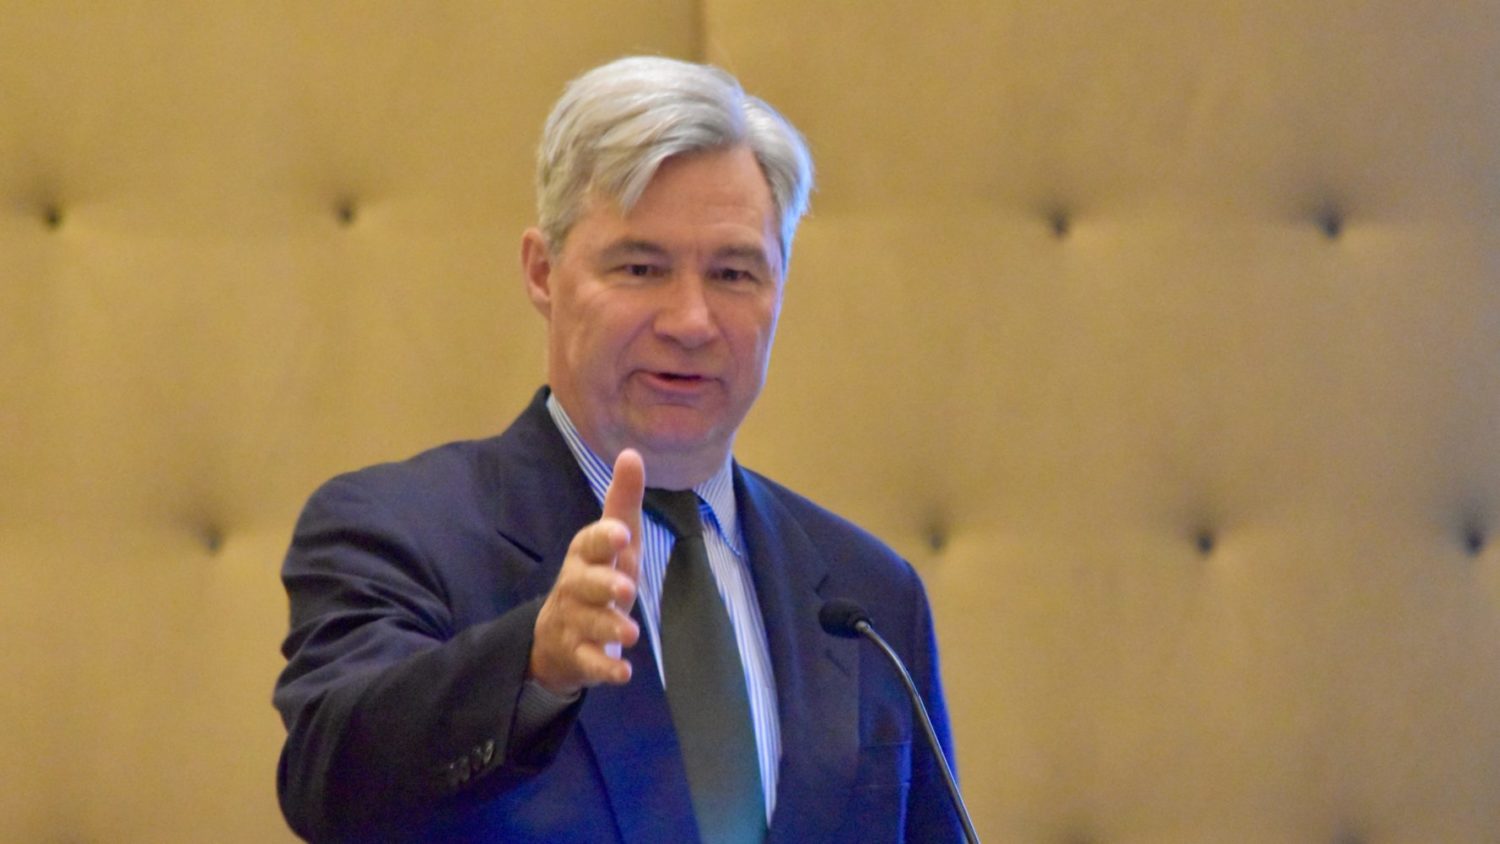 The cynical charade of Sheldon Whitehouse on the Green New Deal